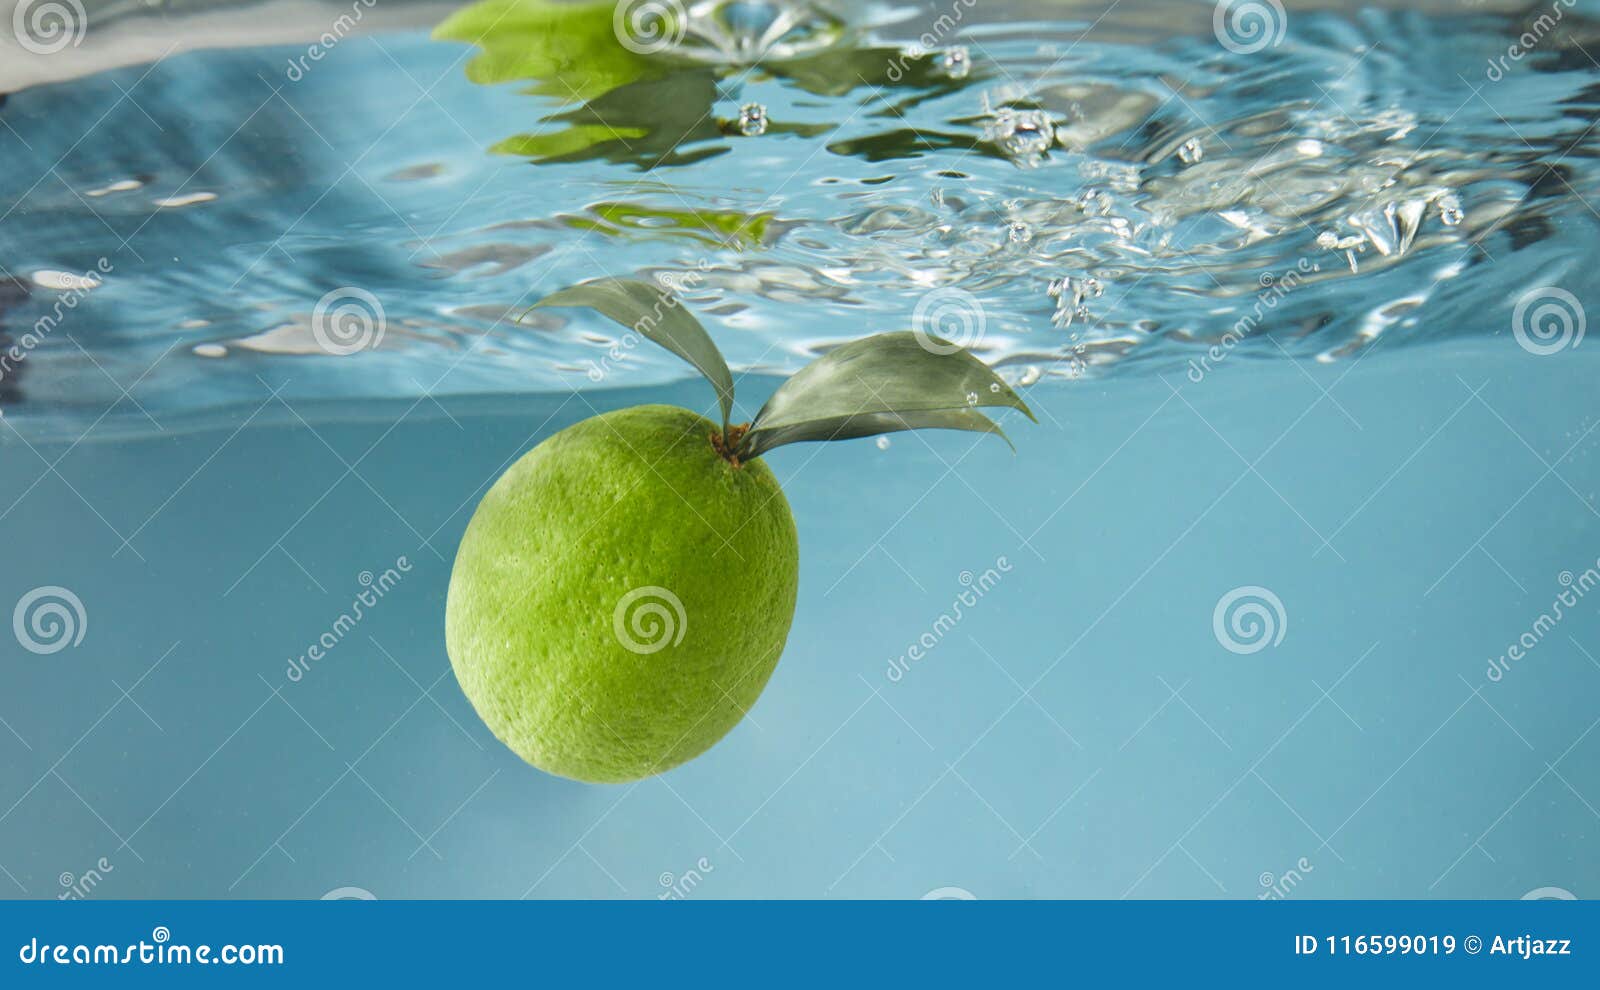 Green Lime Under Water with a Trail of Transparent Bubbles. Stock Image ...